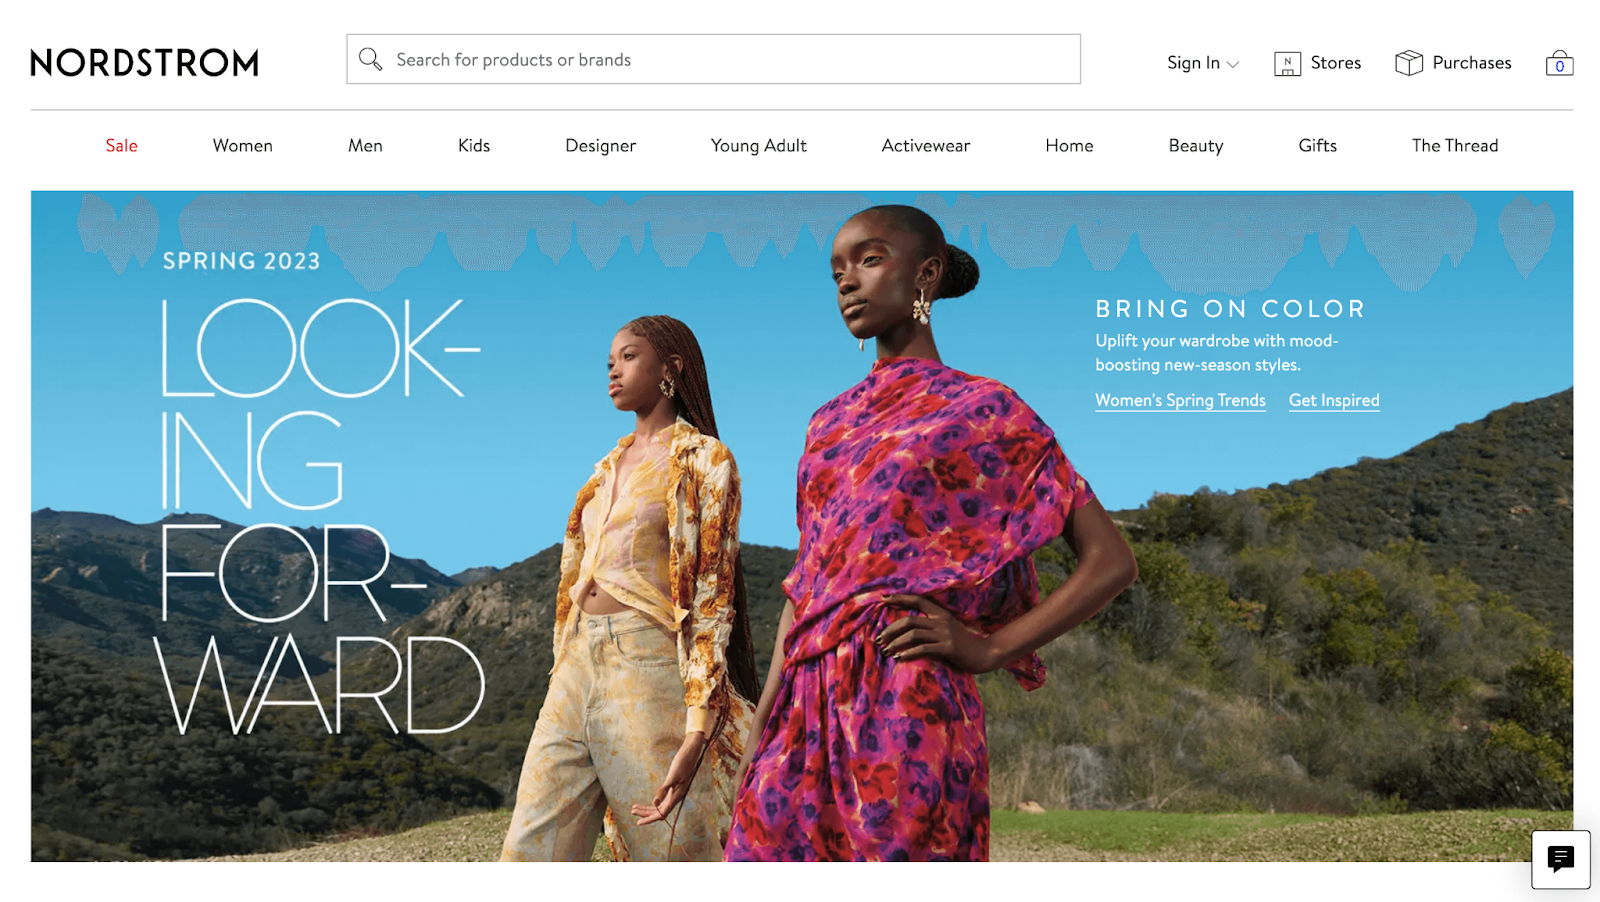 Fashion Industry Loyalty Program Examples–A screenshot from Nordstrom’s homepage. There is an image of two Black women standing outside in front of a green landscape, wearing brightly-colored clothing. The text reads, “Spring 2023 Looking Forward.”